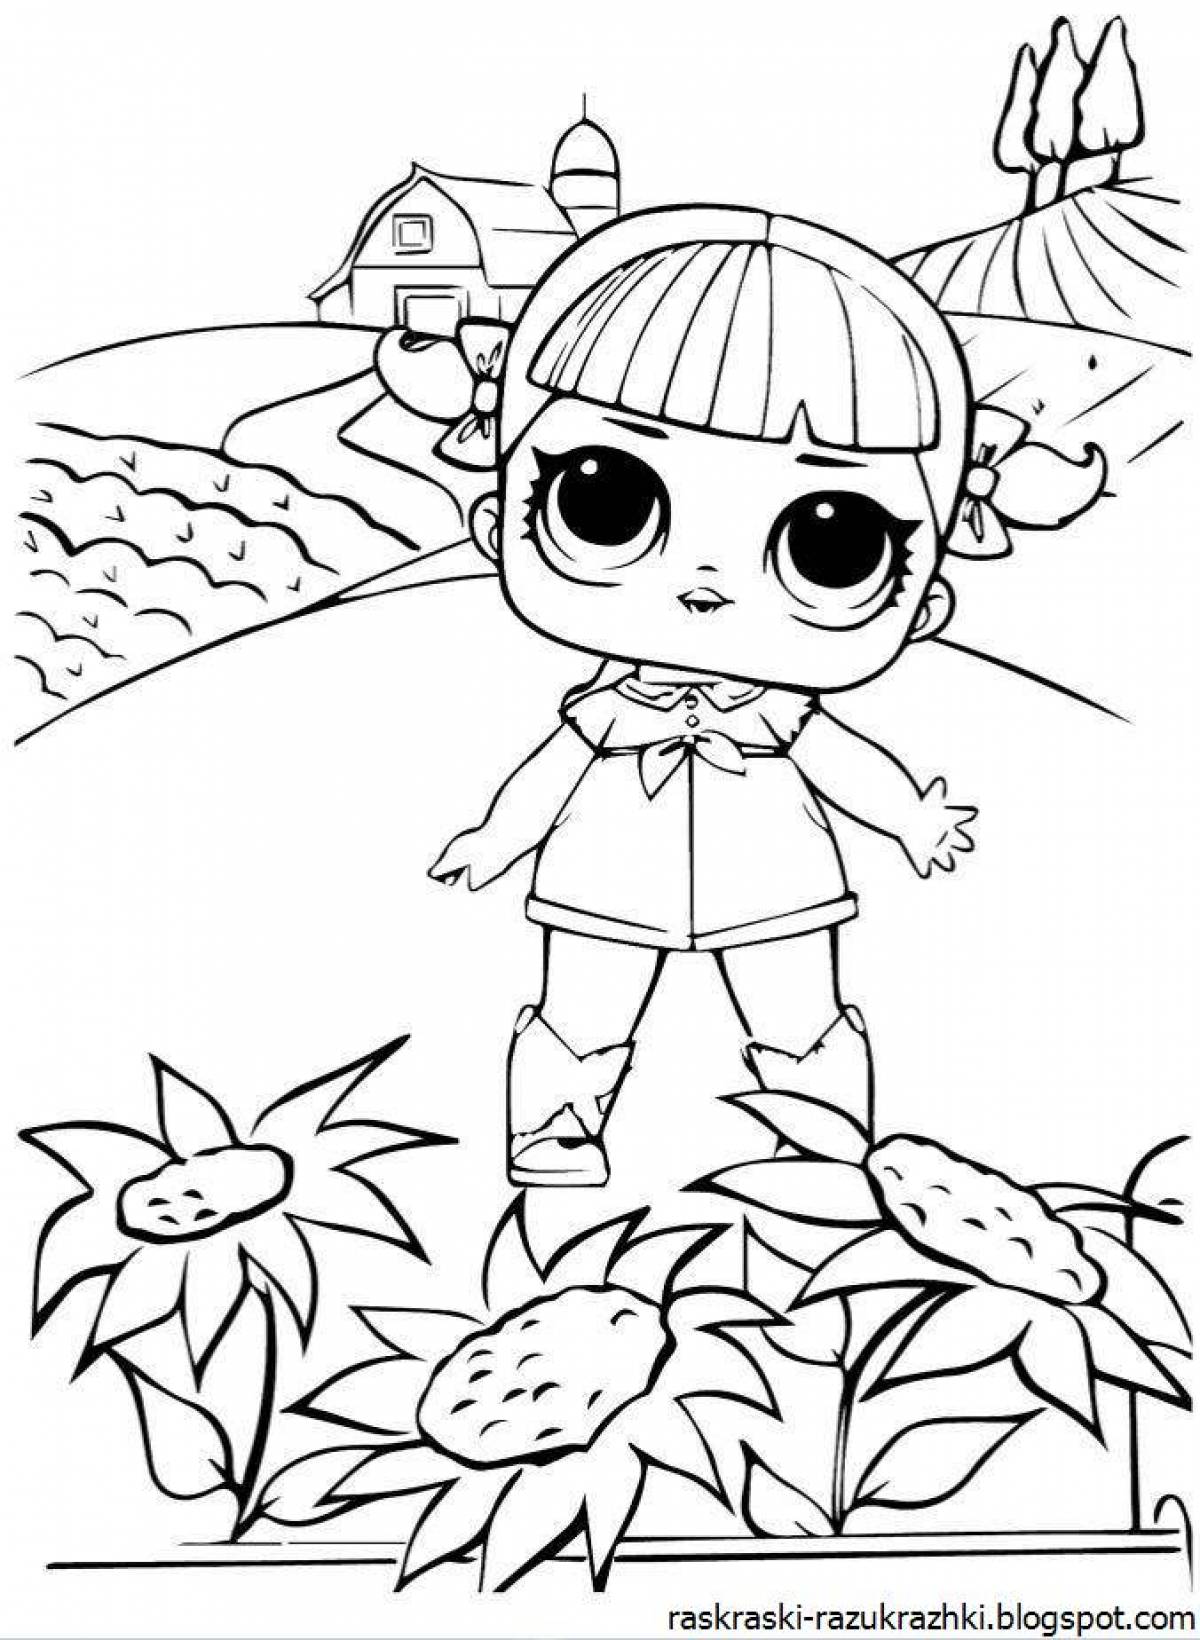 Amazing lol doll coloring book for kids